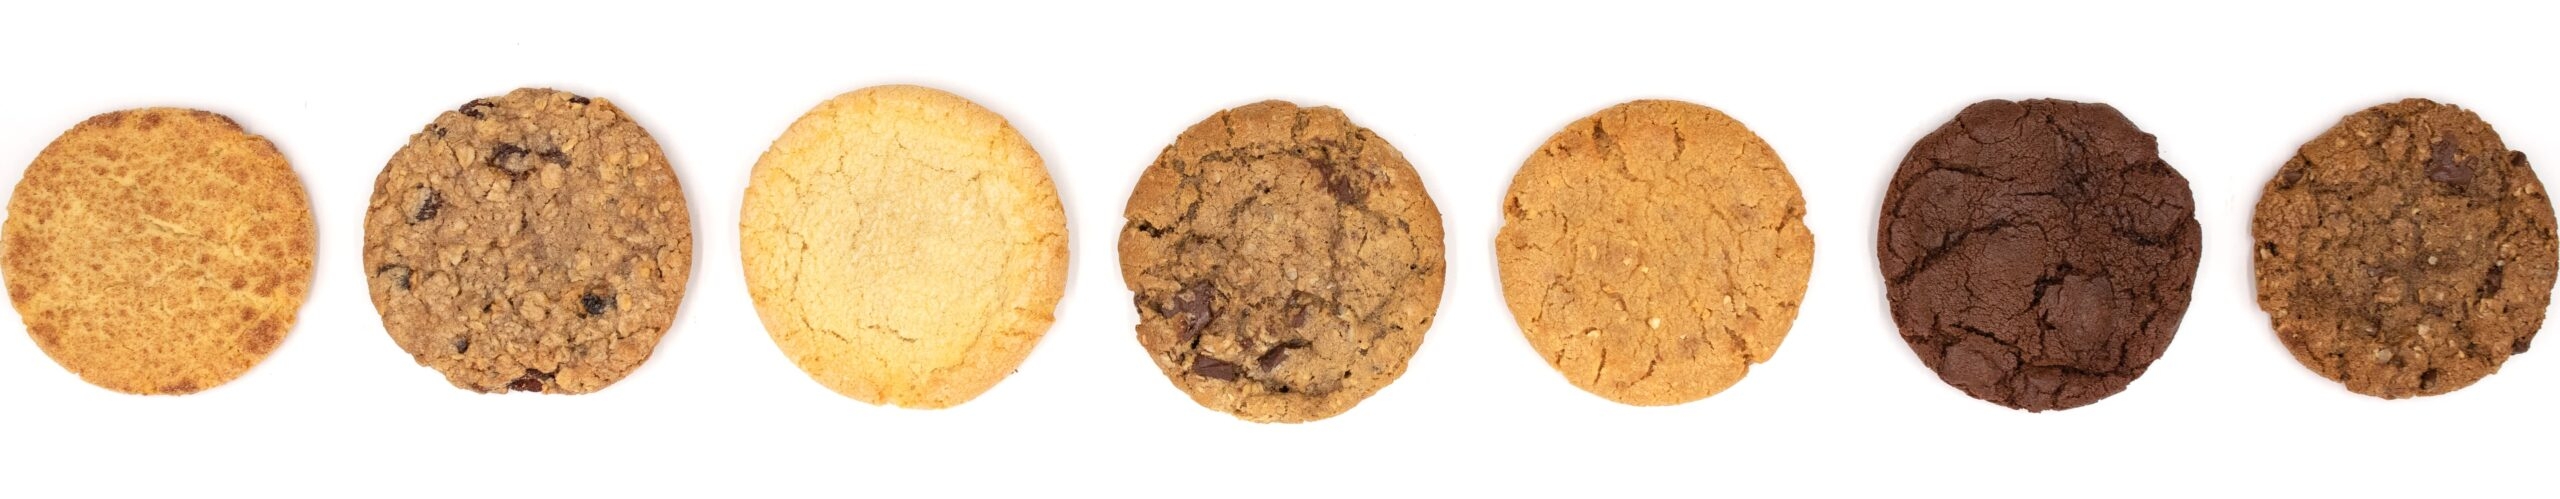 Row of 7 cookies on a white background.